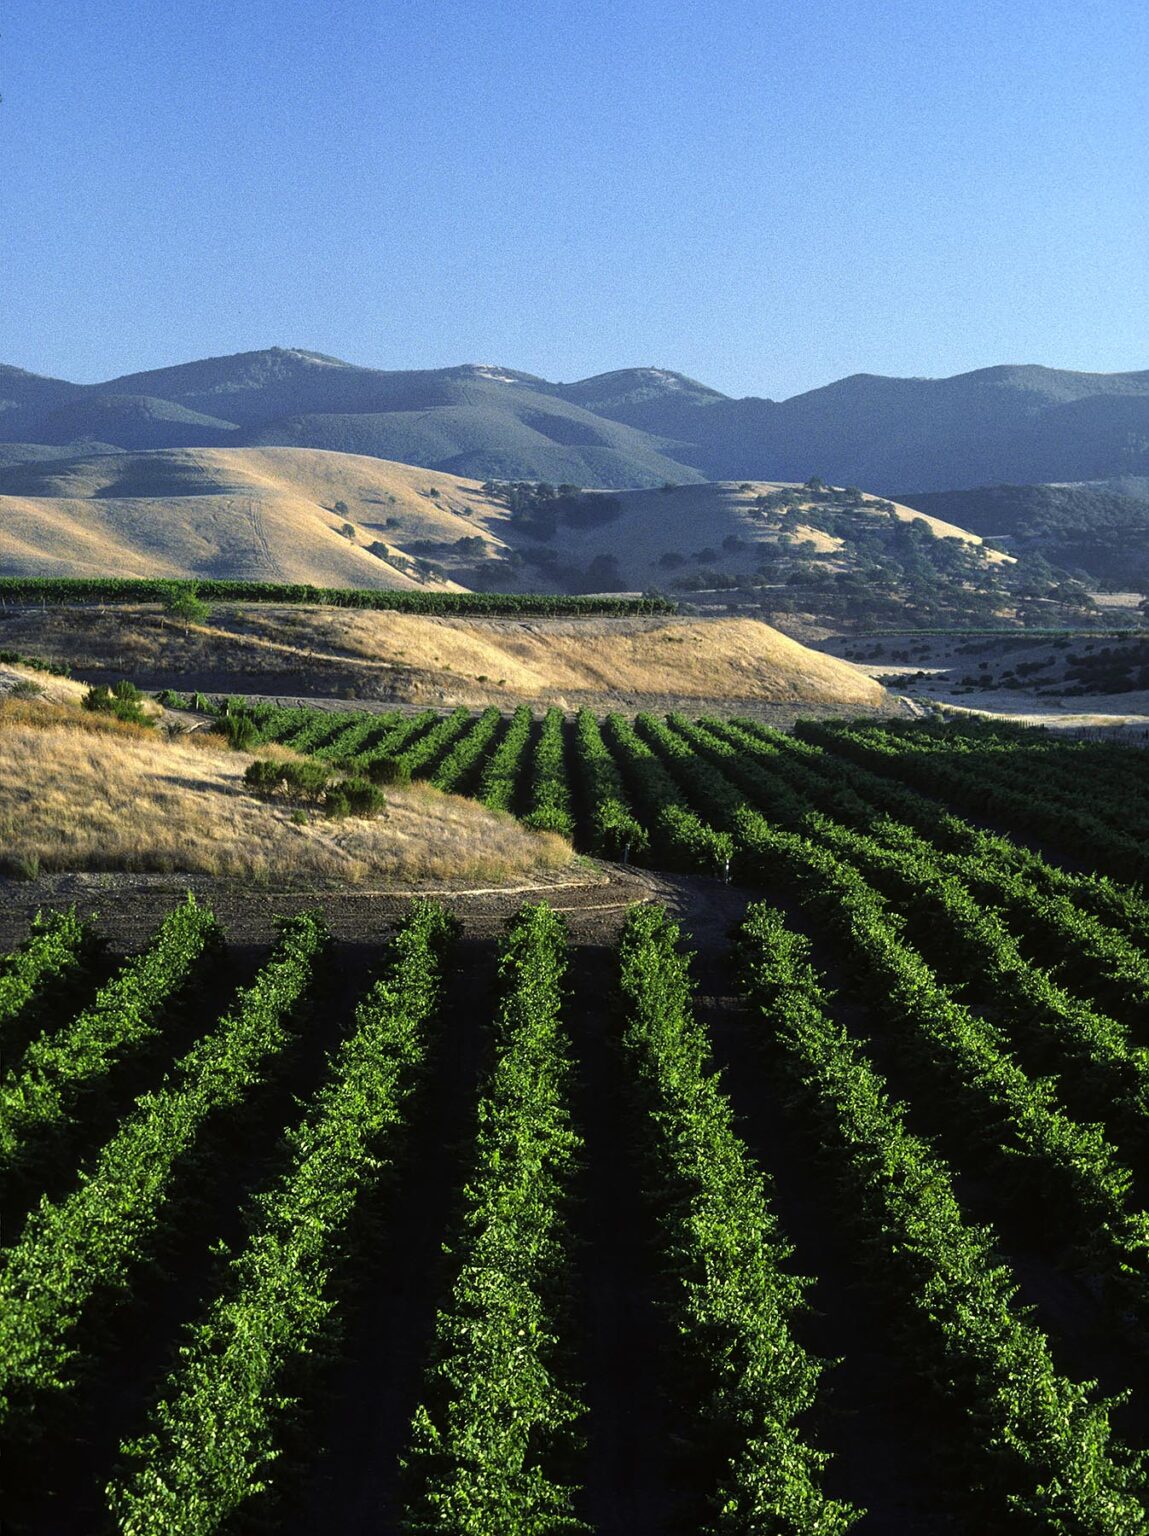 Rows of GRAPE VINES planted up to the rolling hills of the - SALINAS VALLEY, CALIFORNIA